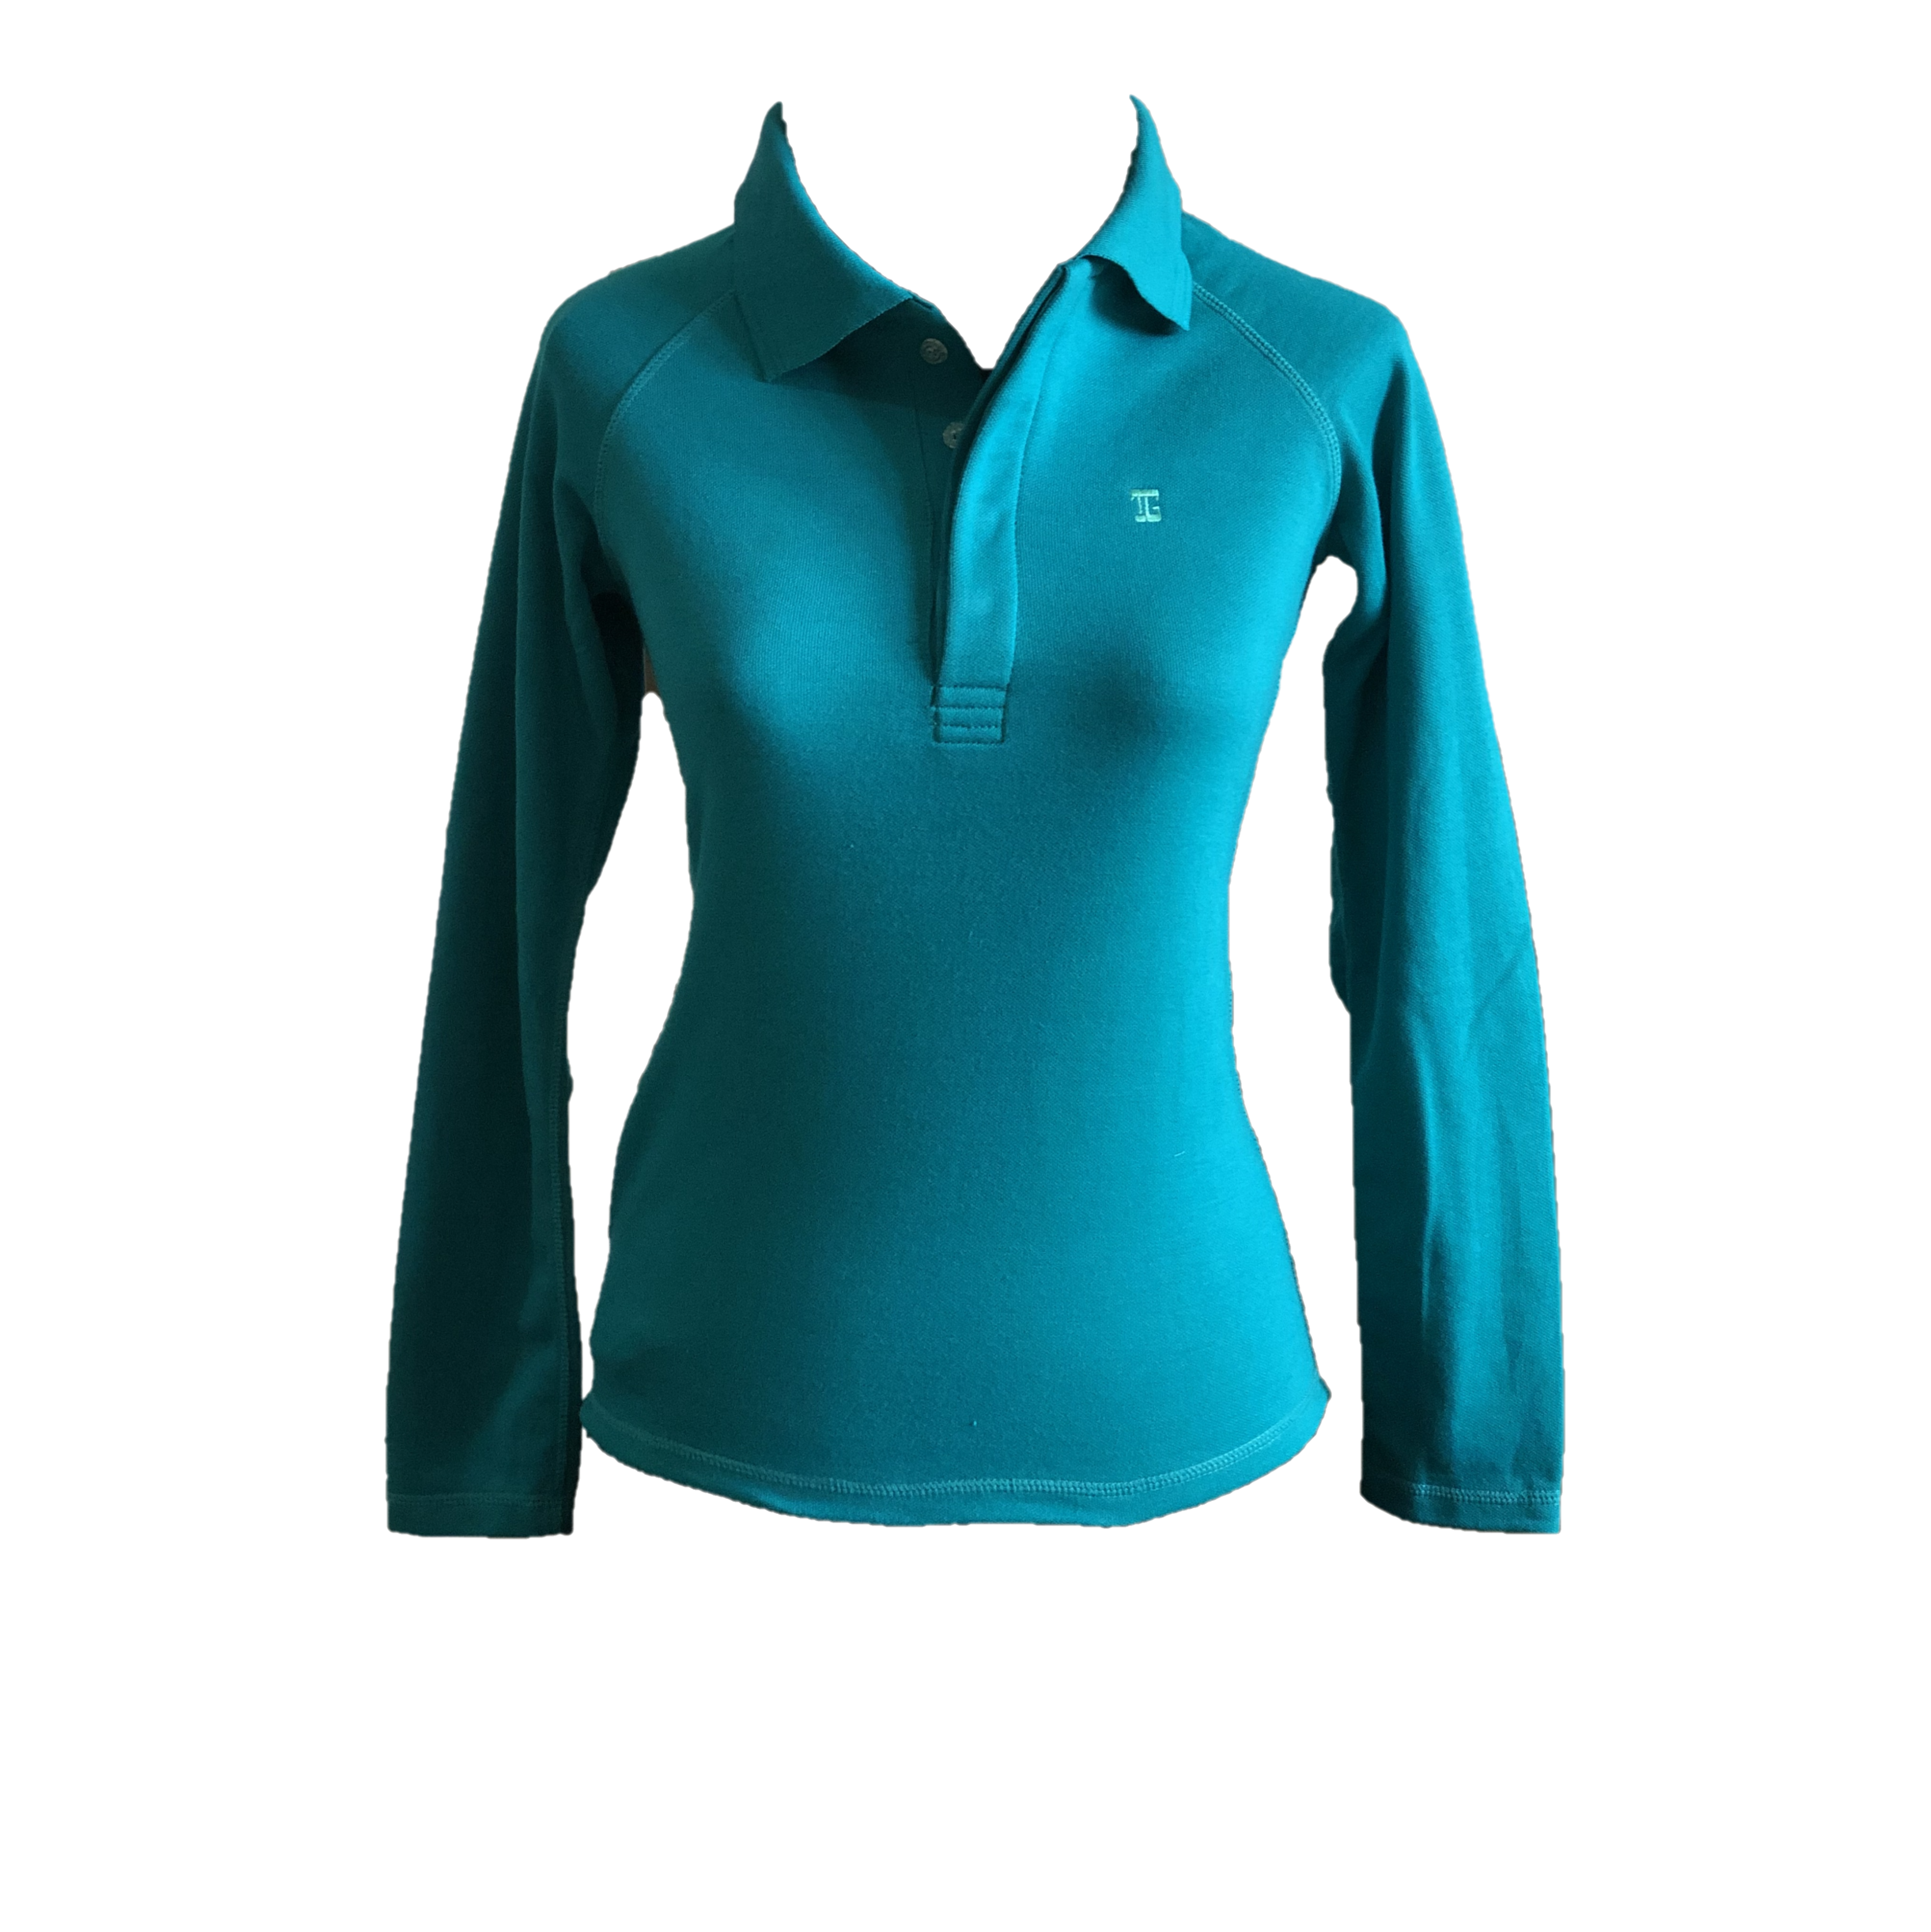 LT-104 || Ladies Top Long Raglan Sleeve With Green One Conseald Side Same Pocket and Conseald Button Collar.